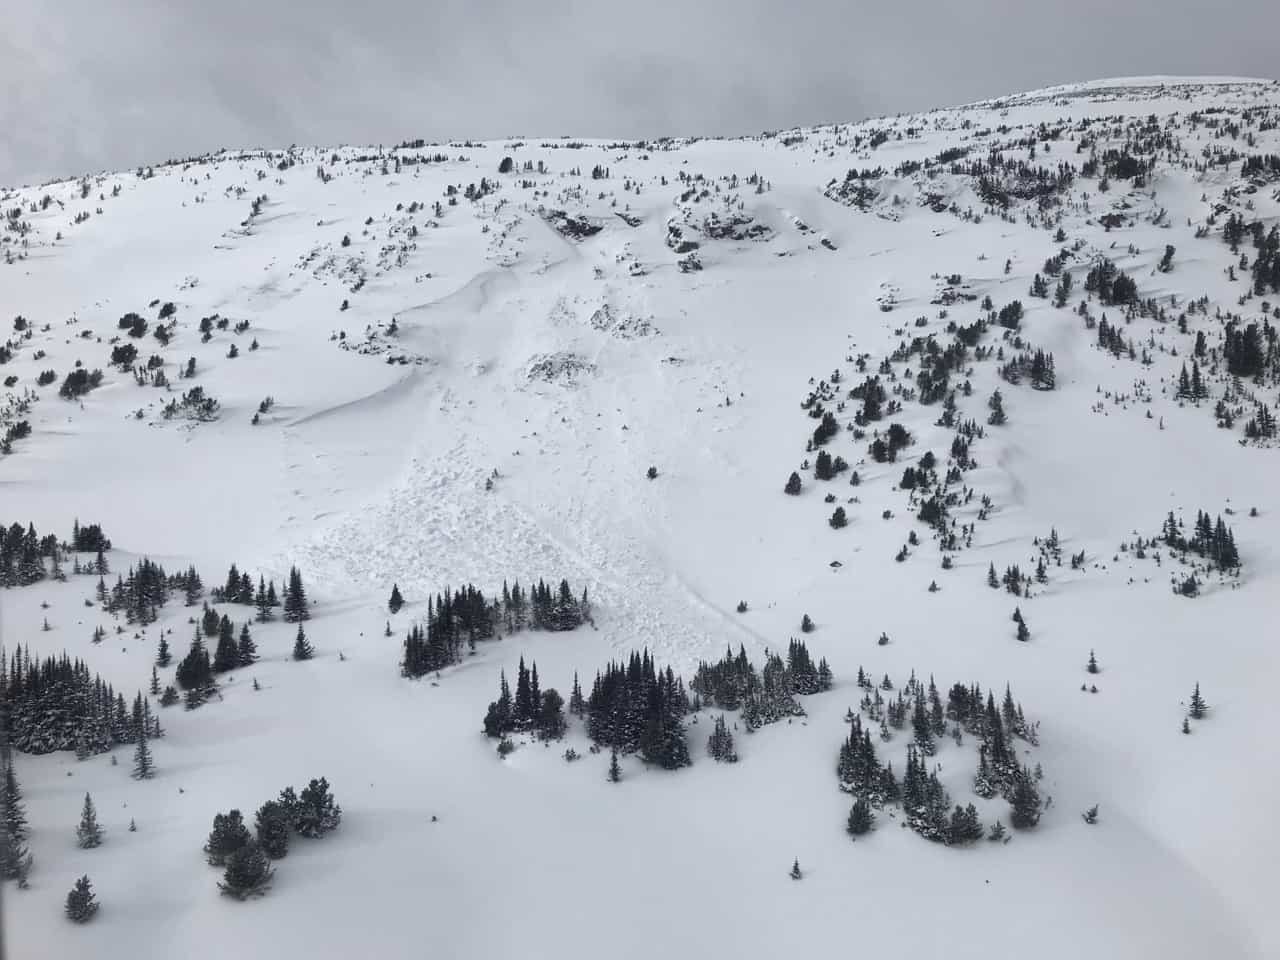 The scene of the fatal avalanche.